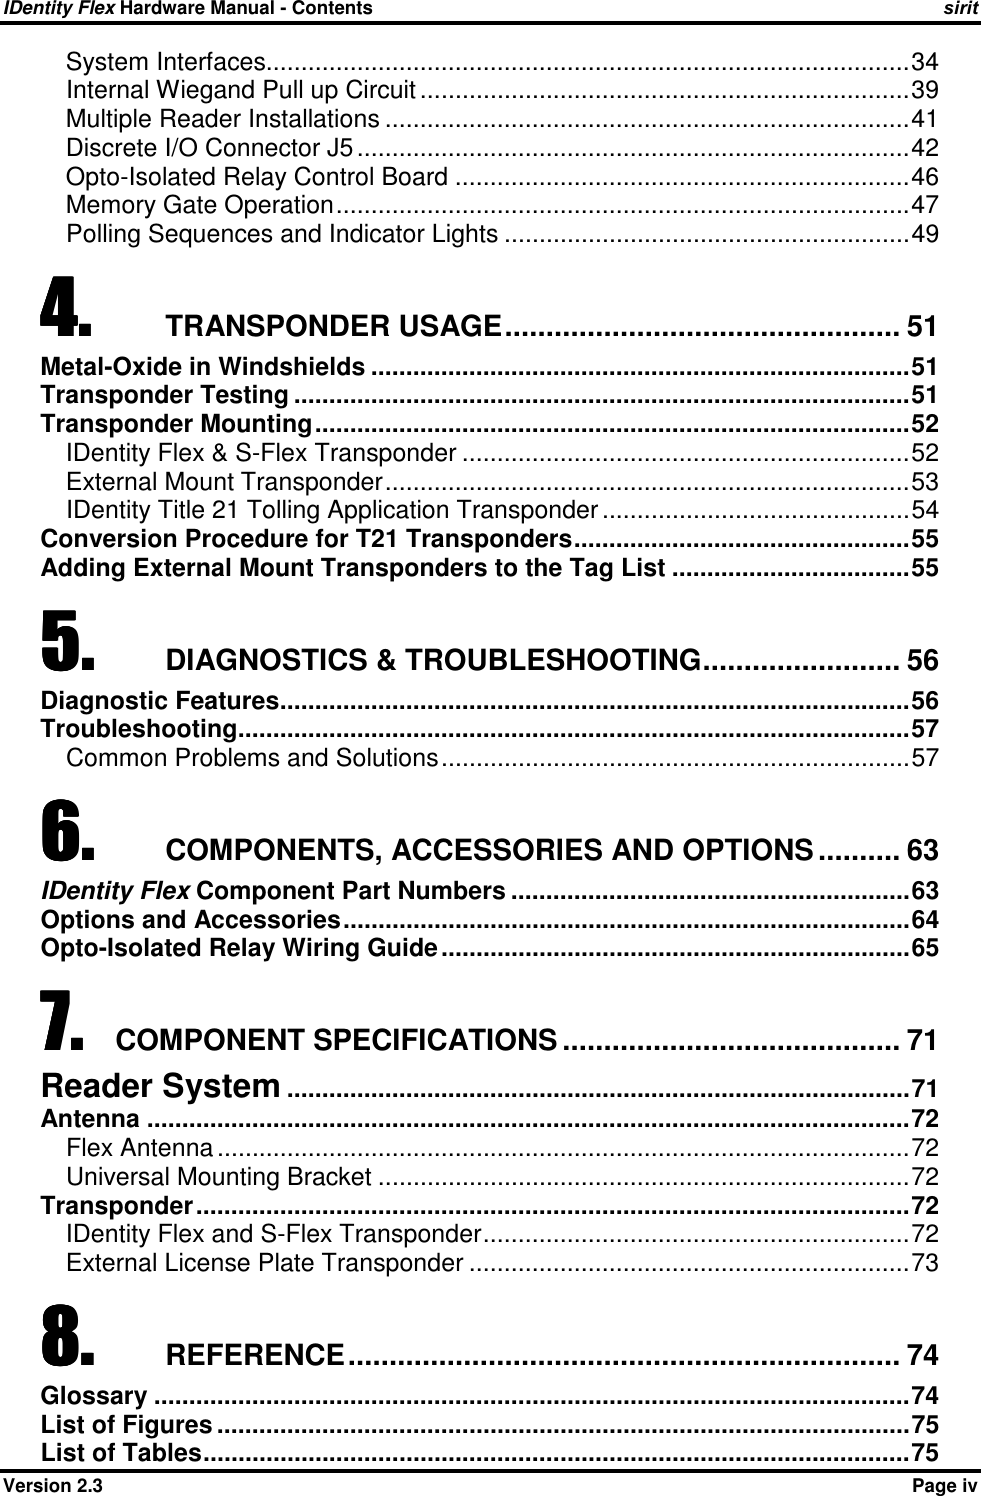 IDentity Flex Hardware Manual - Contents    sirit    Version 2.3    Page iv System Interfaces............................................................................................34 Internal Wiegand Pull up Circuit ......................................................................39 Multiple Reader Installations ...........................................................................41 Discrete I/O Connector J5 ...............................................................................42 Opto-Isolated Relay Control Board .................................................................46 Memory Gate Operation..................................................................................47 Polling Sequences and Indicator Lights ..........................................................49 4.4.4.4. TRANSPONDER USAGE................................................ 51 Metal-Oxide in Windshields .............................................................................51 Transponder Testing ........................................................................................51 Transponder Mounting.....................................................................................52 IDentity Flex &amp; S-Flex Transponder ................................................................52 External Mount Transponder...........................................................................53 IDentity Title 21 Tolling Application Transponder ............................................54 Conversion Procedure for T21 Transponders................................................55 Adding External Mount Transponders to the Tag List ..................................55 5.5.5.5. DIAGNOSTICS &amp; TROUBLESHOOTING........................ 56 Diagnostic Features..........................................................................................56 Troubleshooting................................................................................................57 Common Problems and Solutions...................................................................57 6.6.6.6. COMPONENTS, ACCESSORIES AND OPTIONS .......... 63 IDentity Flex Component Part Numbers .........................................................63 Options and Accessories.................................................................................64 Opto-Isolated Relay Wiring Guide...................................................................65 7.7.7.7. COMPONENT SPECIFICATIONS ......................................... 71 Reader System .........................................................................................71 Antenna .............................................................................................................72 Flex Antenna ...................................................................................................72 Universal Mounting Bracket ............................................................................72 Transponder......................................................................................................72 IDentity Flex and S-Flex Transponder.............................................................72 External License Plate Transponder ...............................................................73 8.8.8.8. REFERENCE................................................................... 74 Glossary ............................................................................................................74 List of Figures ...................................................................................................75 List of Tables.....................................................................................................75 